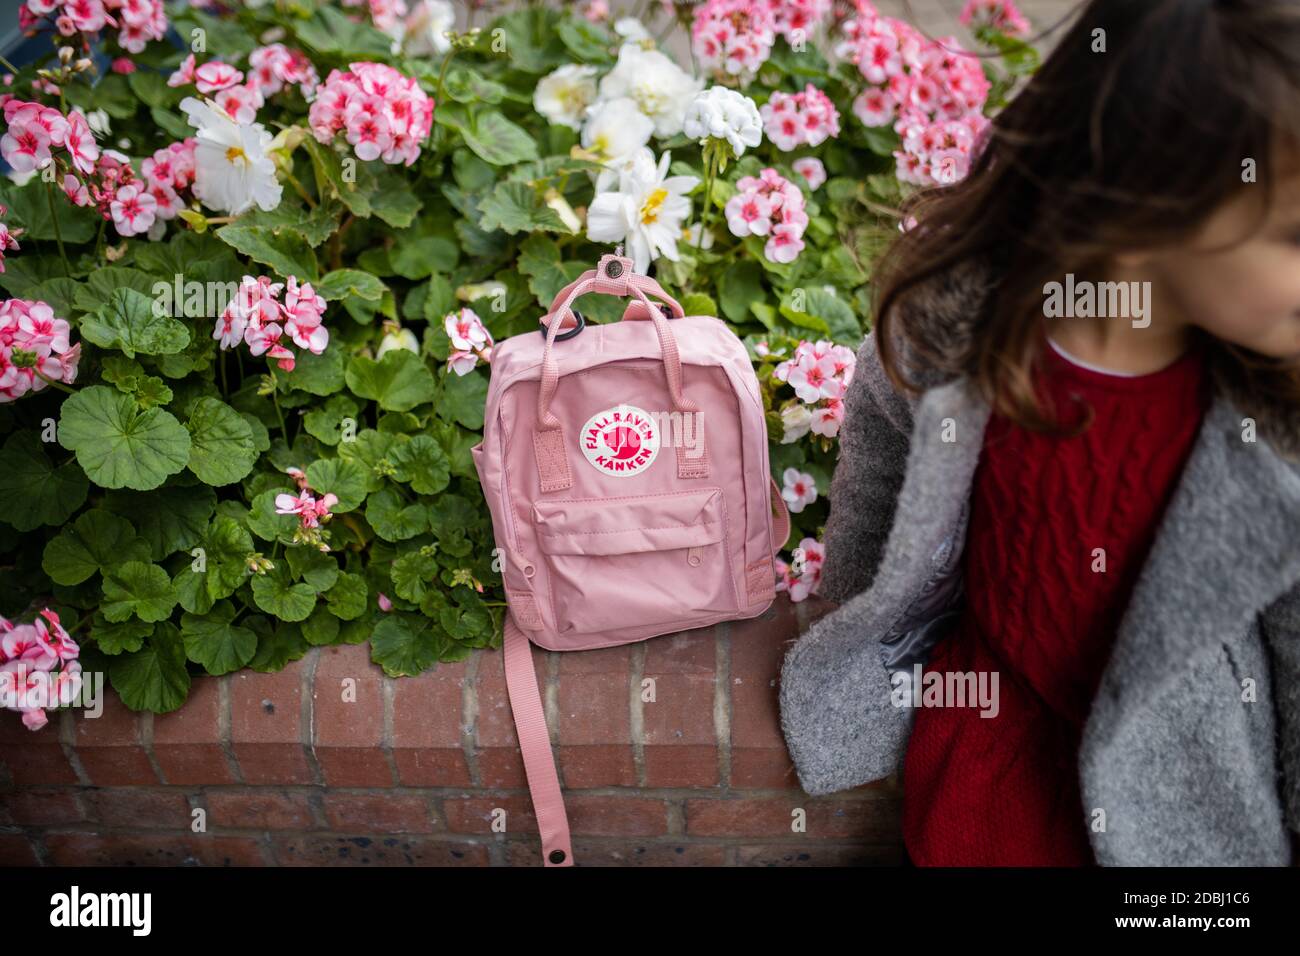 Pink backpack on a brick planter with pink flowers and next to a little girl Stock Photo